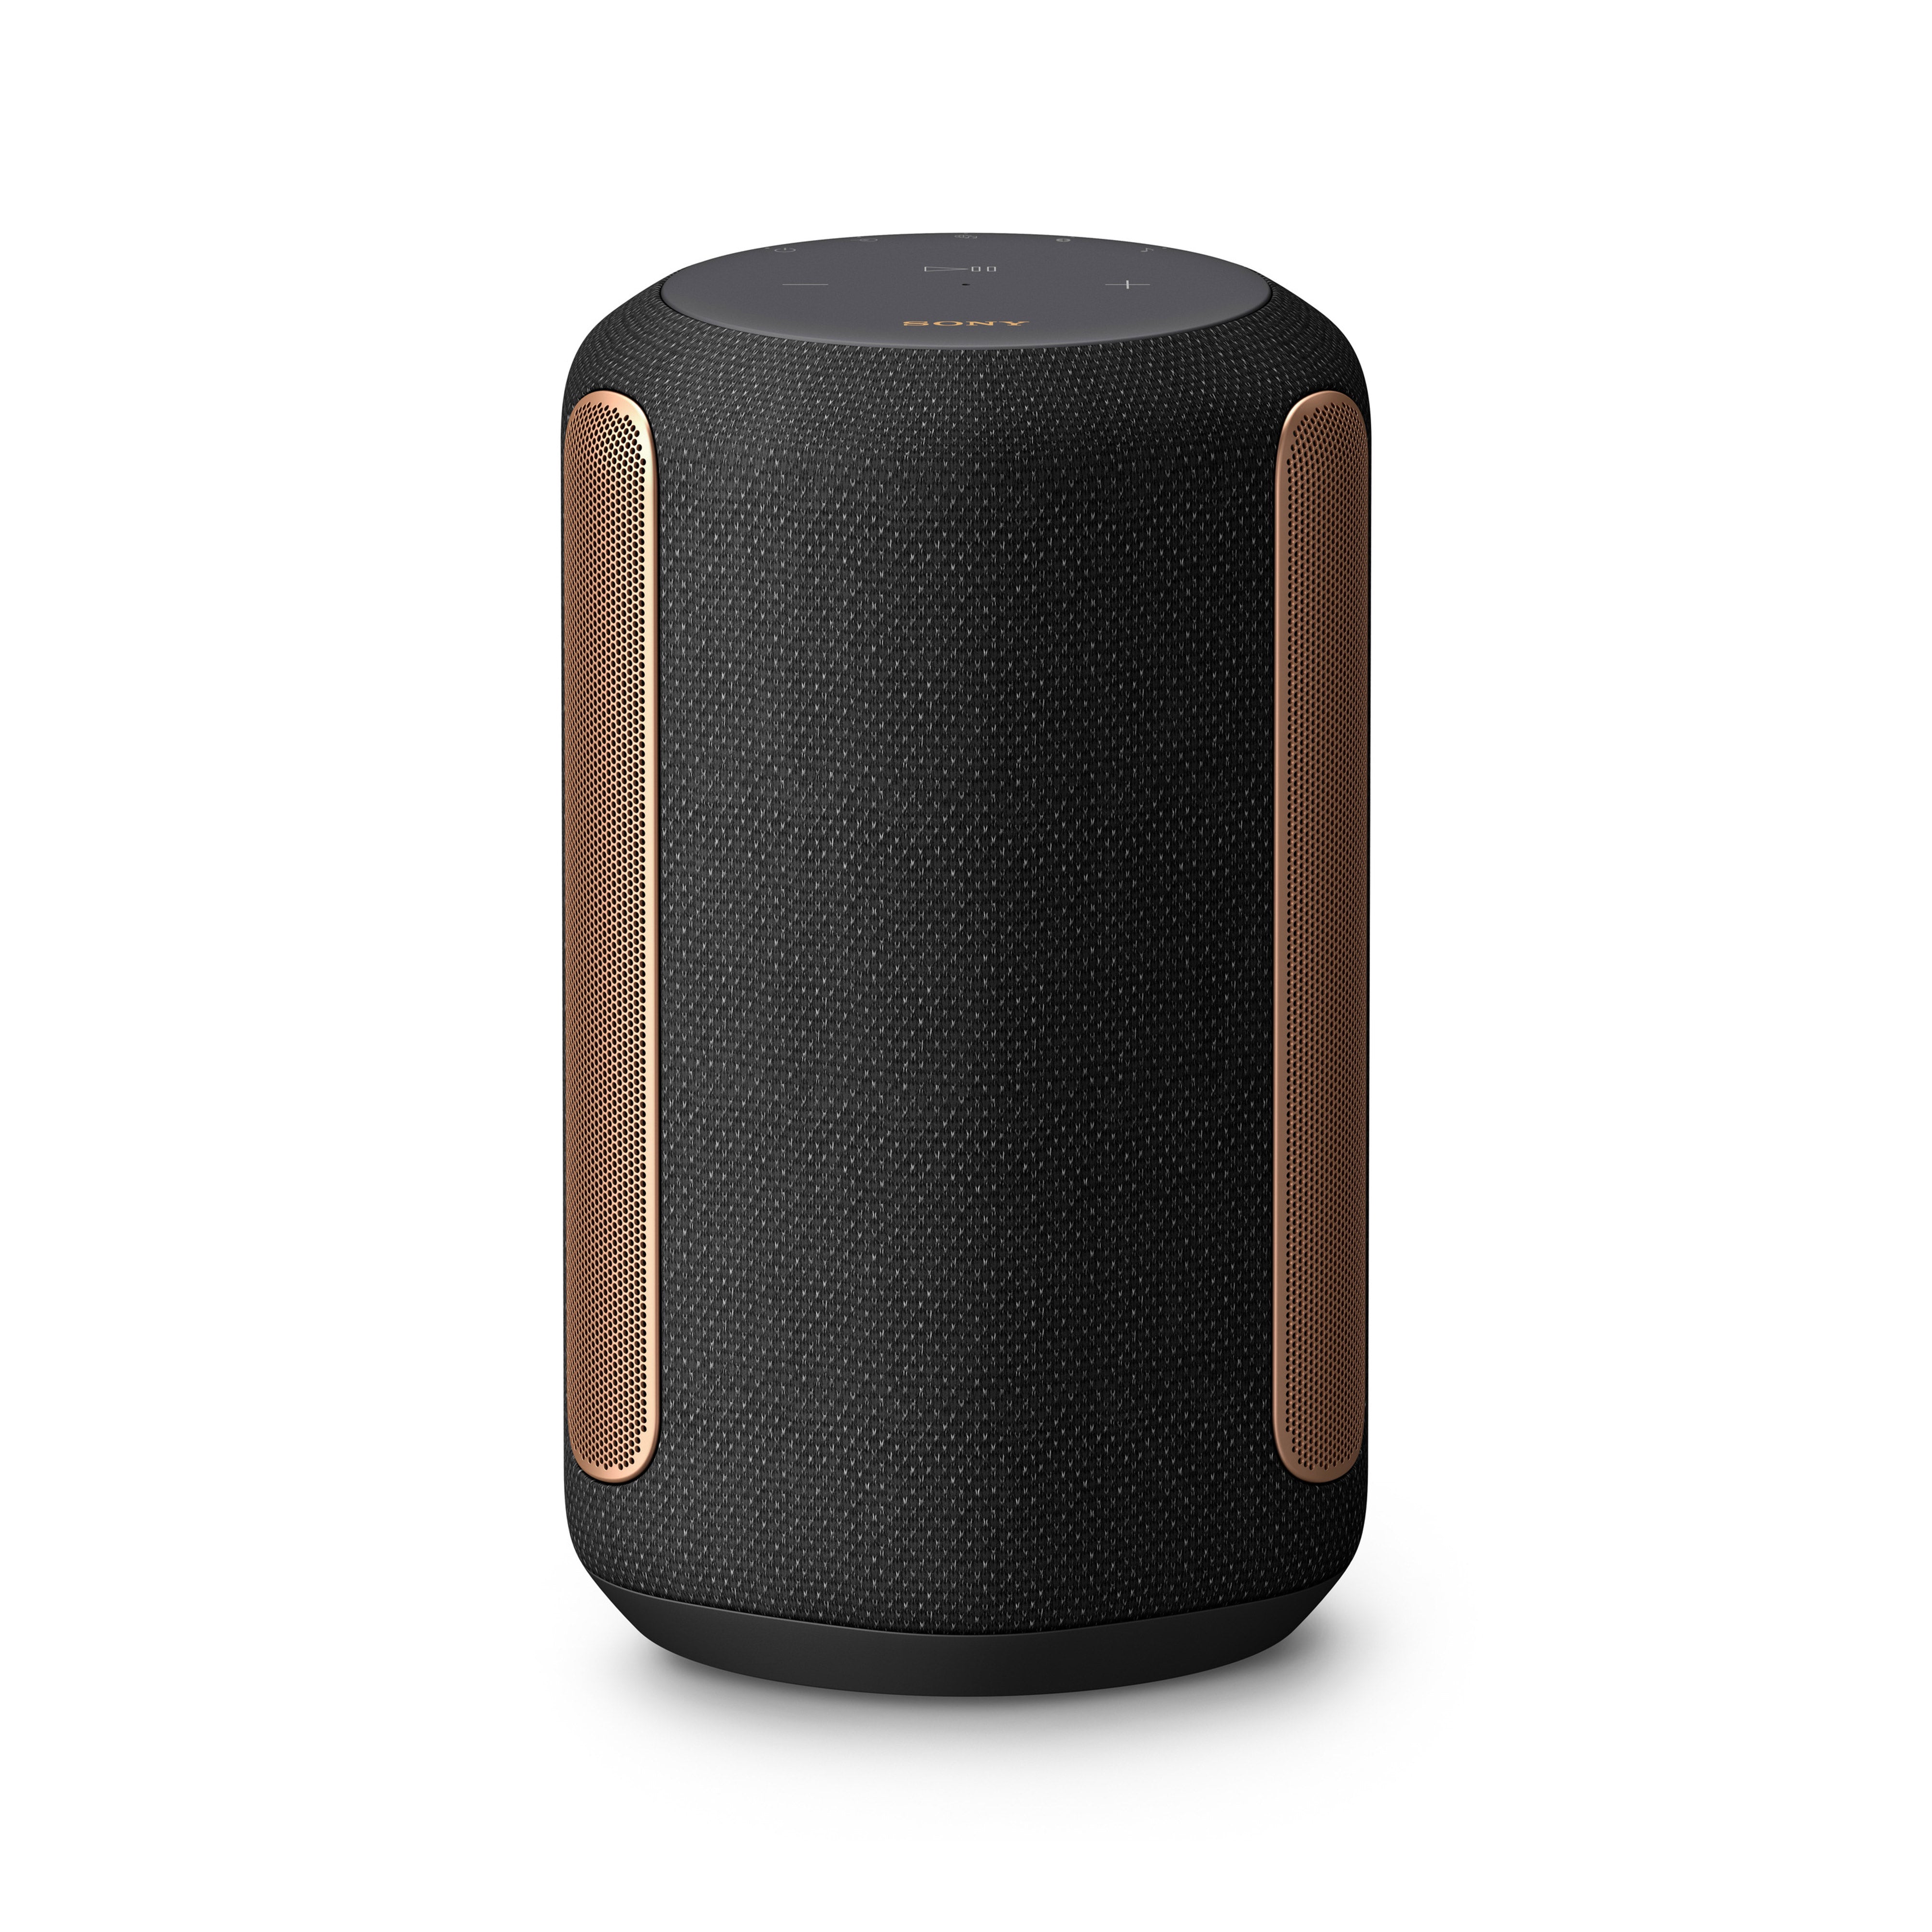 SRS-RA3000 Premium Wireless Speaker with Ambient Room-filling Sound (Black)